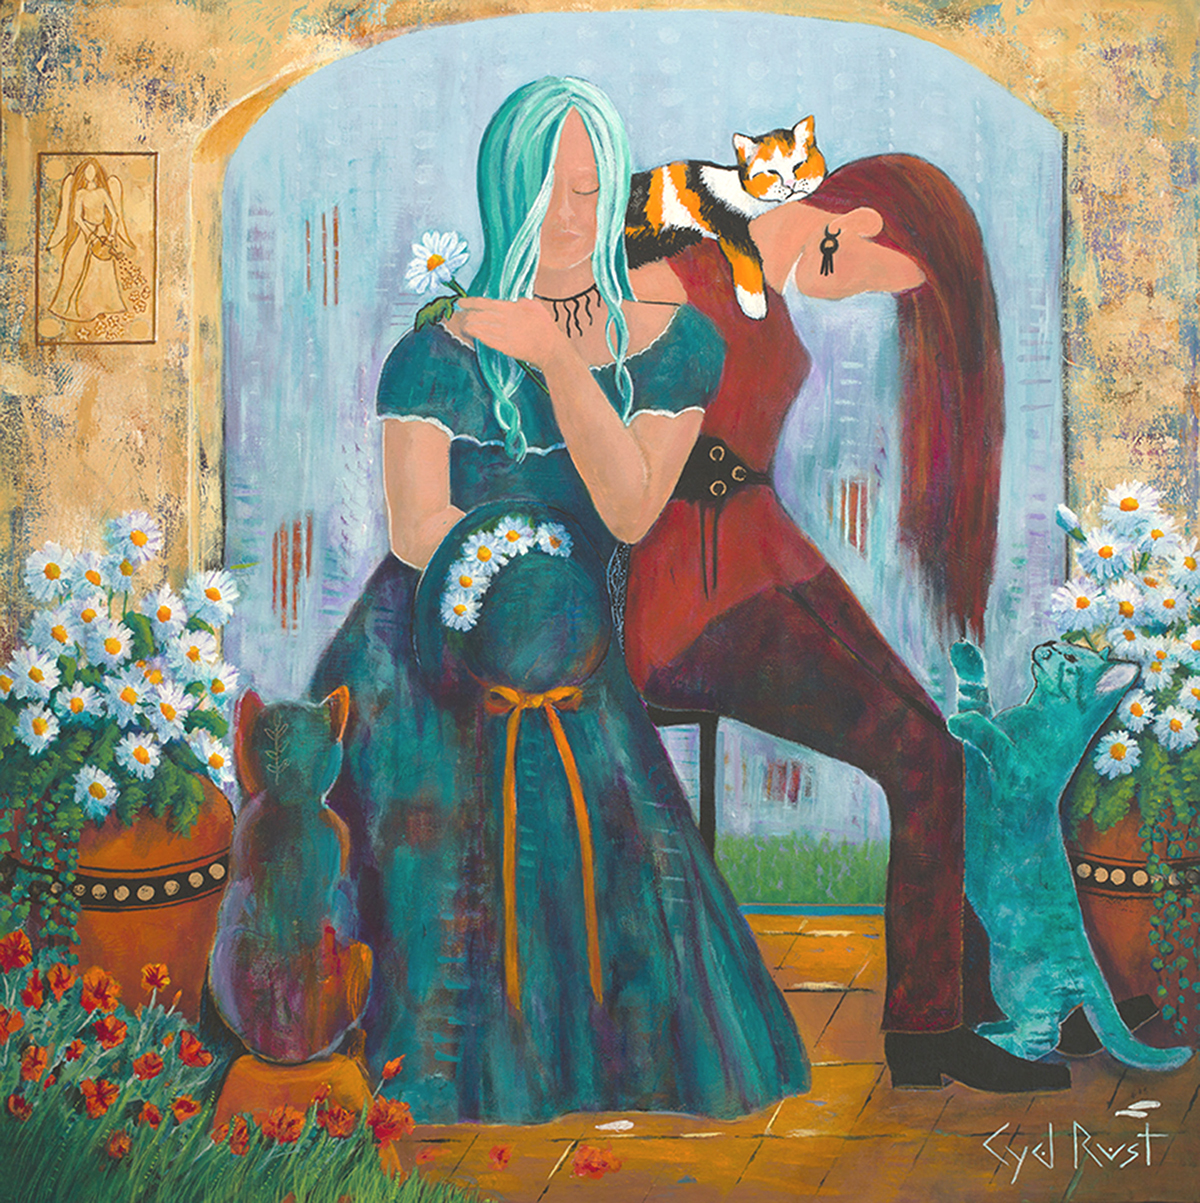 LIFE: NOURISH YOUR SOUL ©Cyd Rust: A 36" x 36" Acrylic Painting on Gallery Wrapped Canvas